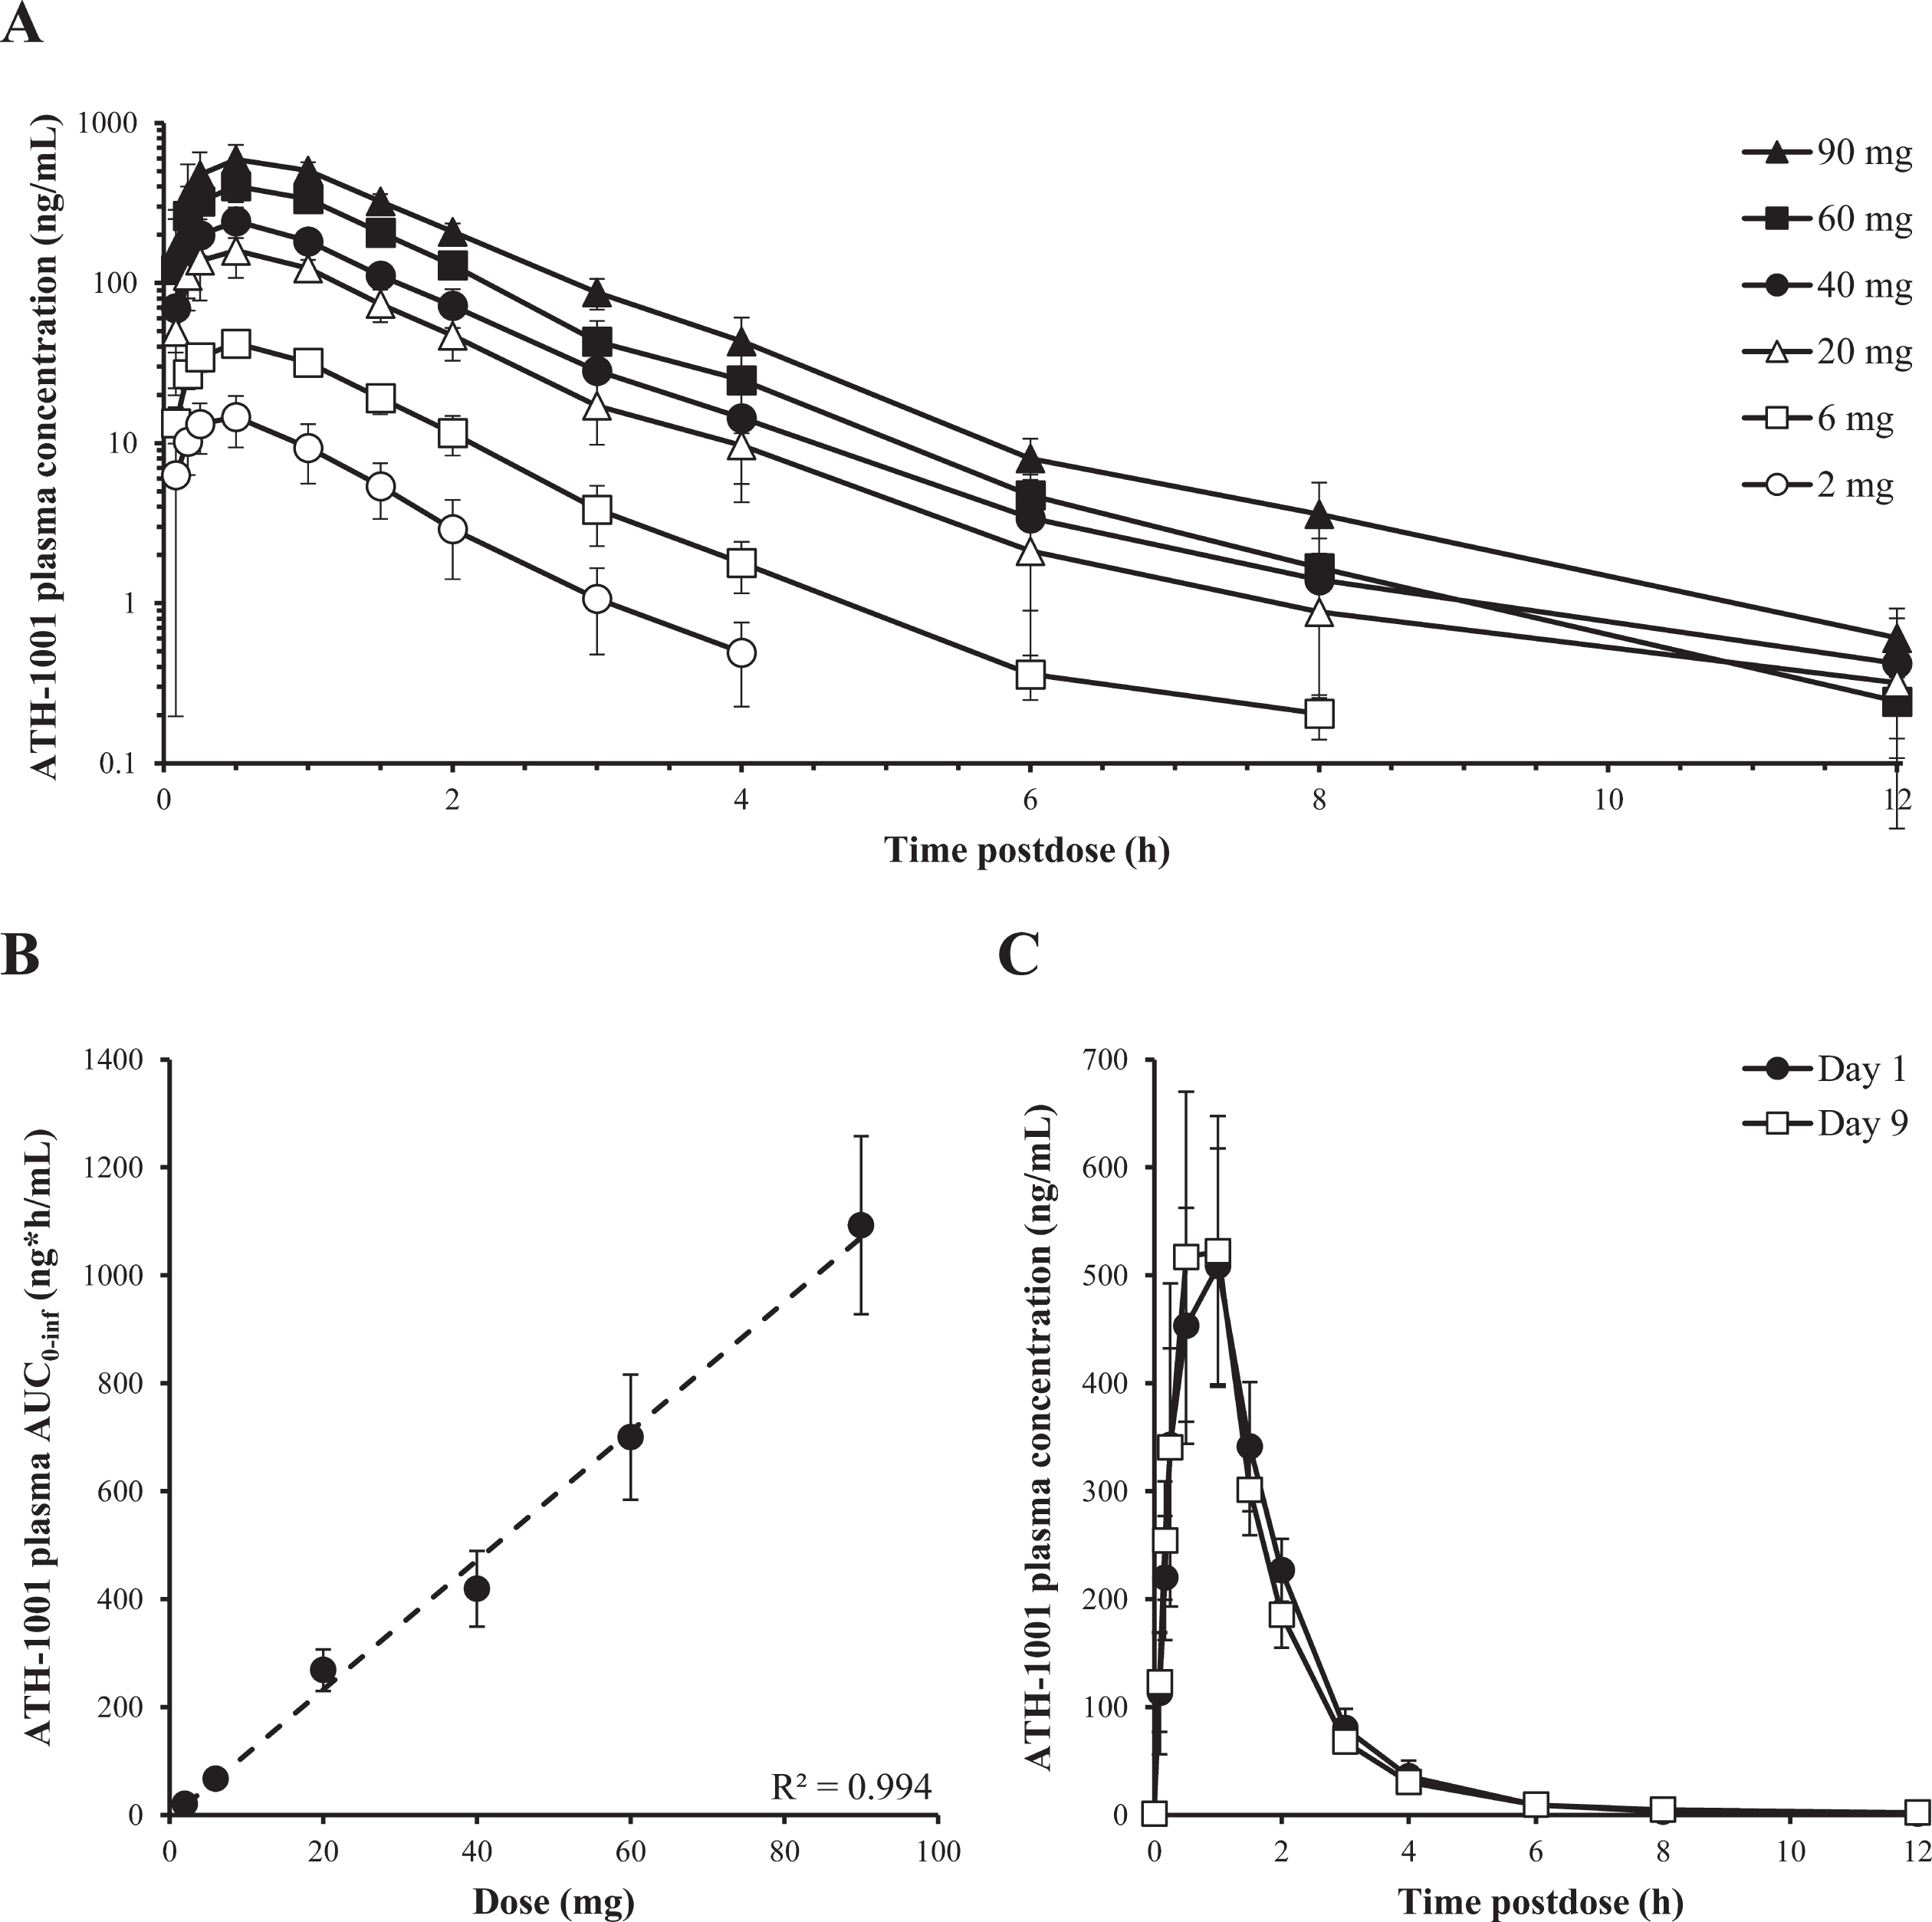 Pharmacokinetic profile of the active metabolite ATH-1001 after single and multiple once-daily SC doses of fosgonimeton. A) Plasma concentration of ATH-1001 in healthy young volunteers after single SC dose of 2 to 90 mg fosgonimeton (arithmetic mean±SD). B) Plasma AUC0 - inf of ATH-1001 in healthy young volunteers after a single SC dose of fosgonimeton demonstrated dose linearity (R2 = 0.994, arithmetic mean±SD). C) Plasma concentrations of ATH-1001 in healthy elderly volunteers on Day 1 (black circle) and Day 9 (open square) after once-daily SC injections of 60 mg fosgonimeton showed no appreciable accumulation and similar exposures between Day 1 and Day 9 (arithmetic mean±SD). AUC0 - inf, area under the plasma concentration-time curve from time zero to infinity; SC, subcutaneous; SD, standard deviation.